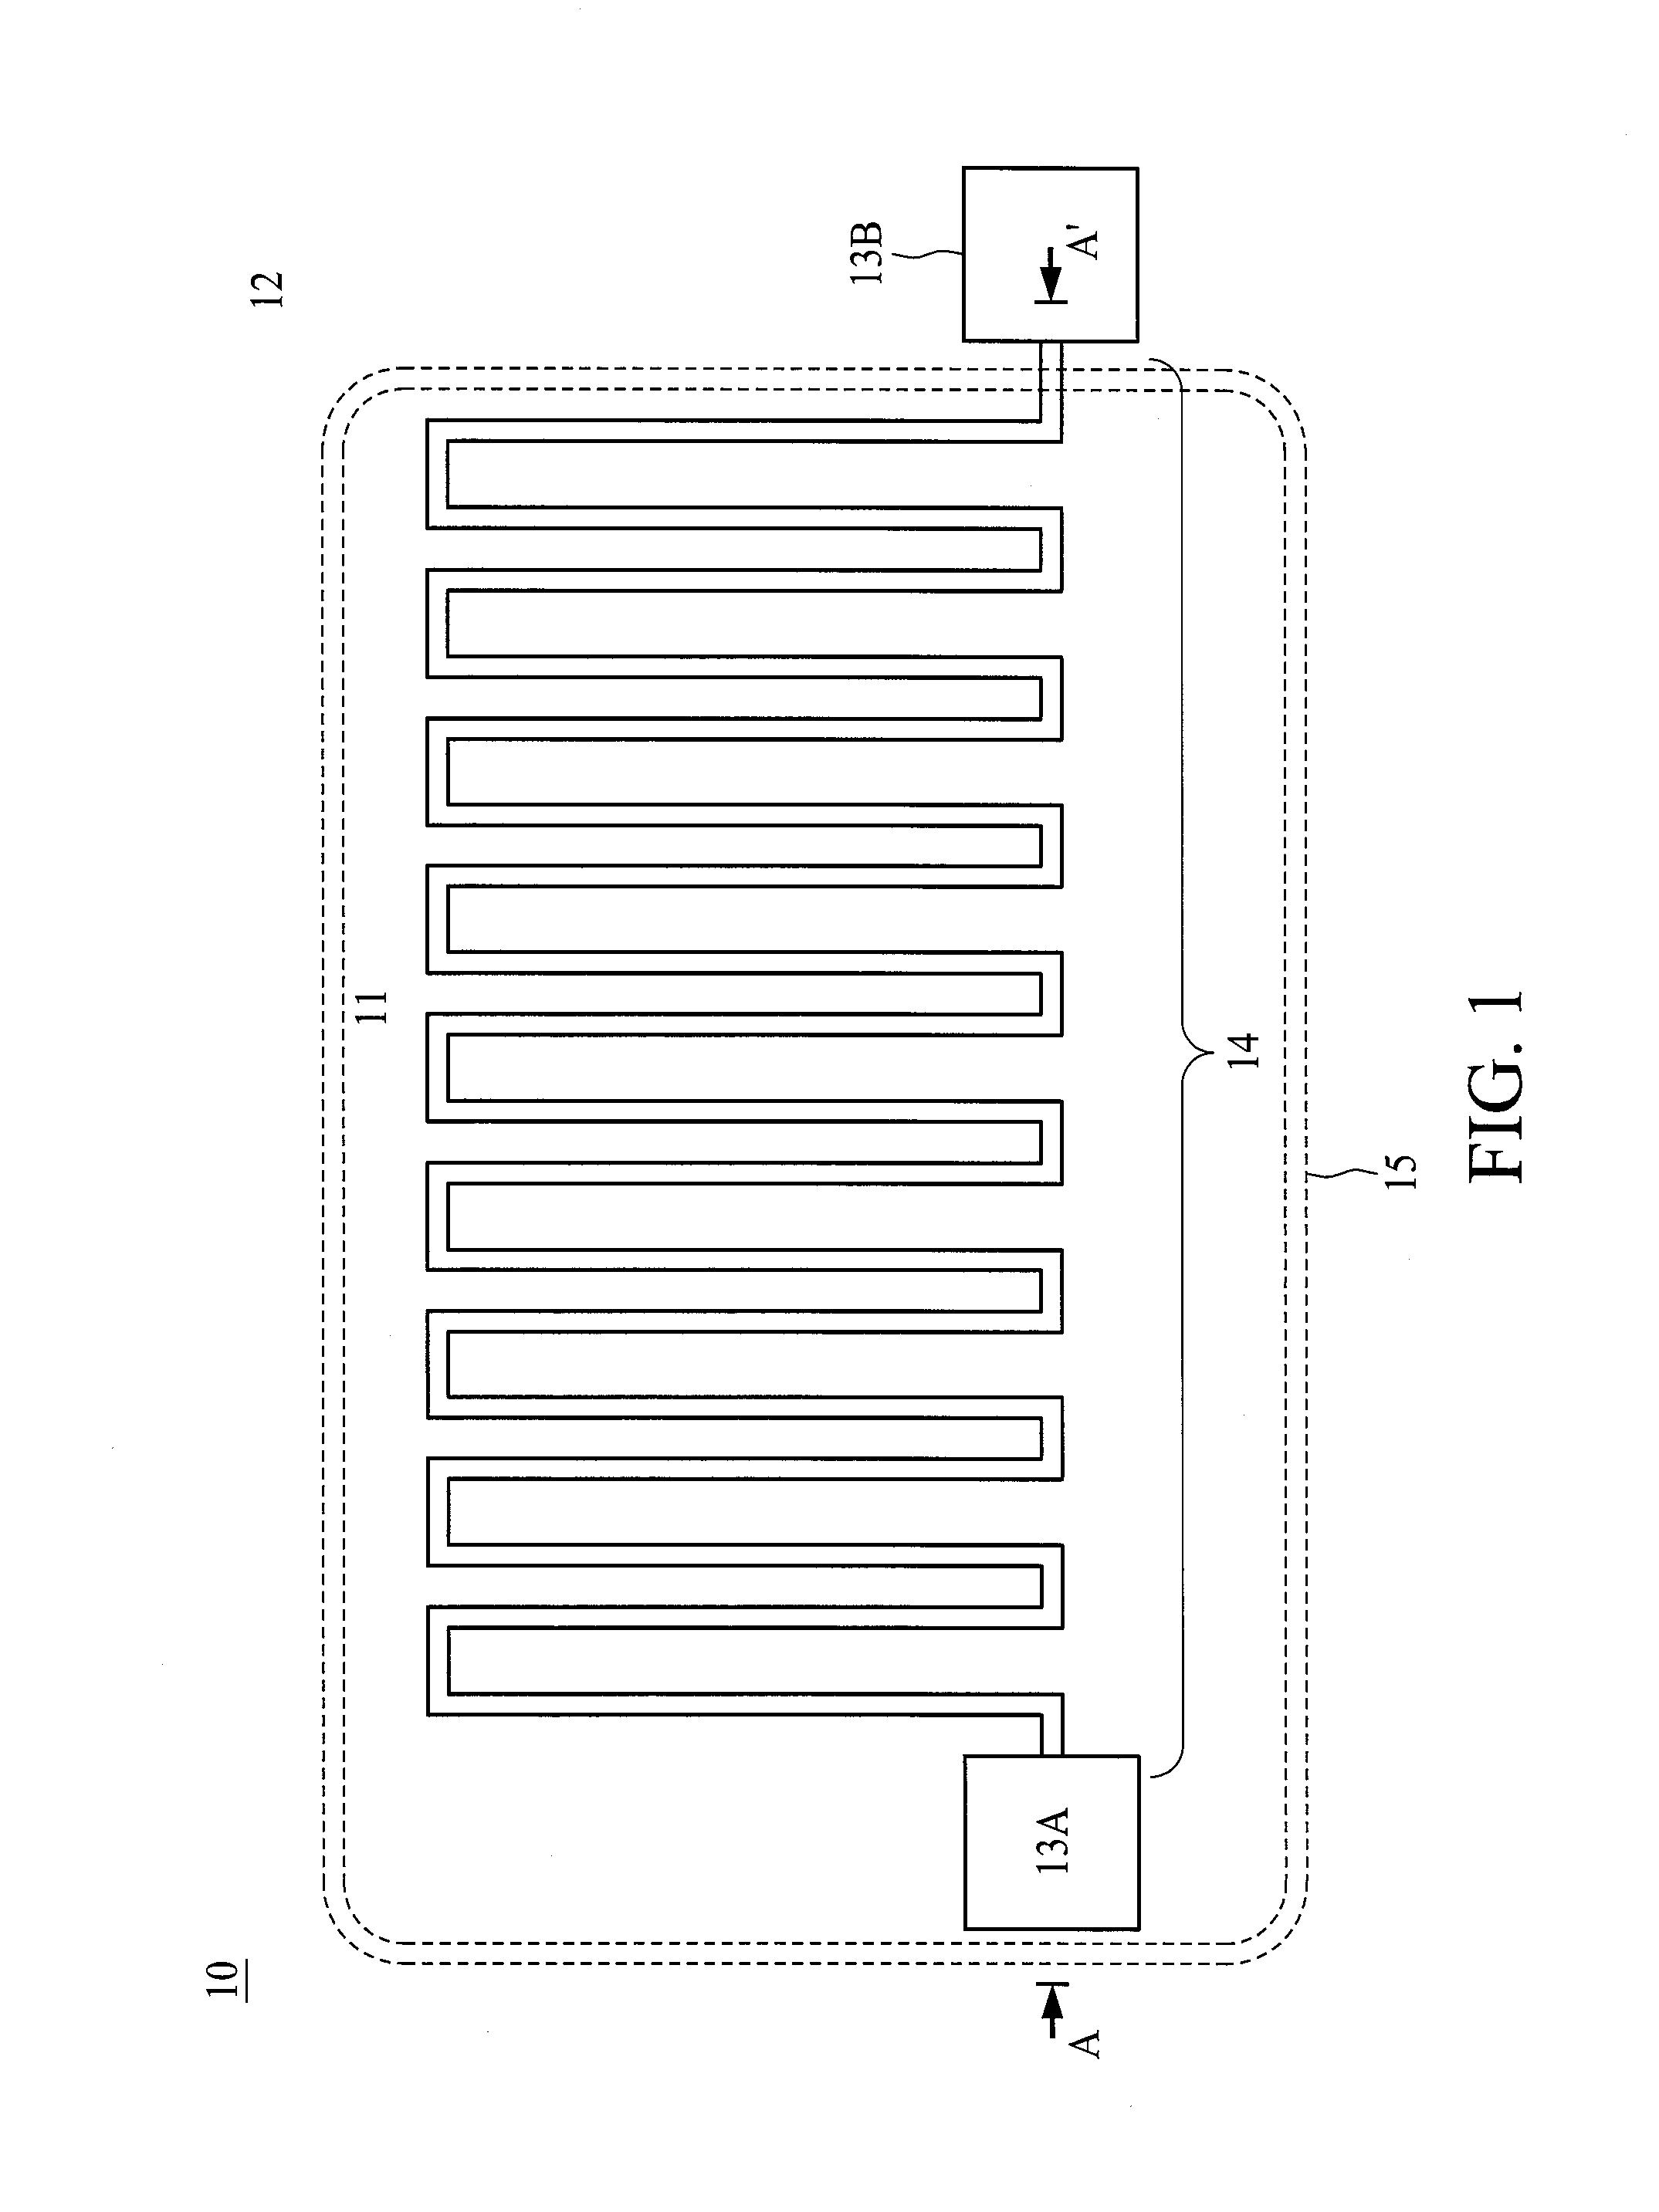 Semiconductor structure and method of manufacturing the same